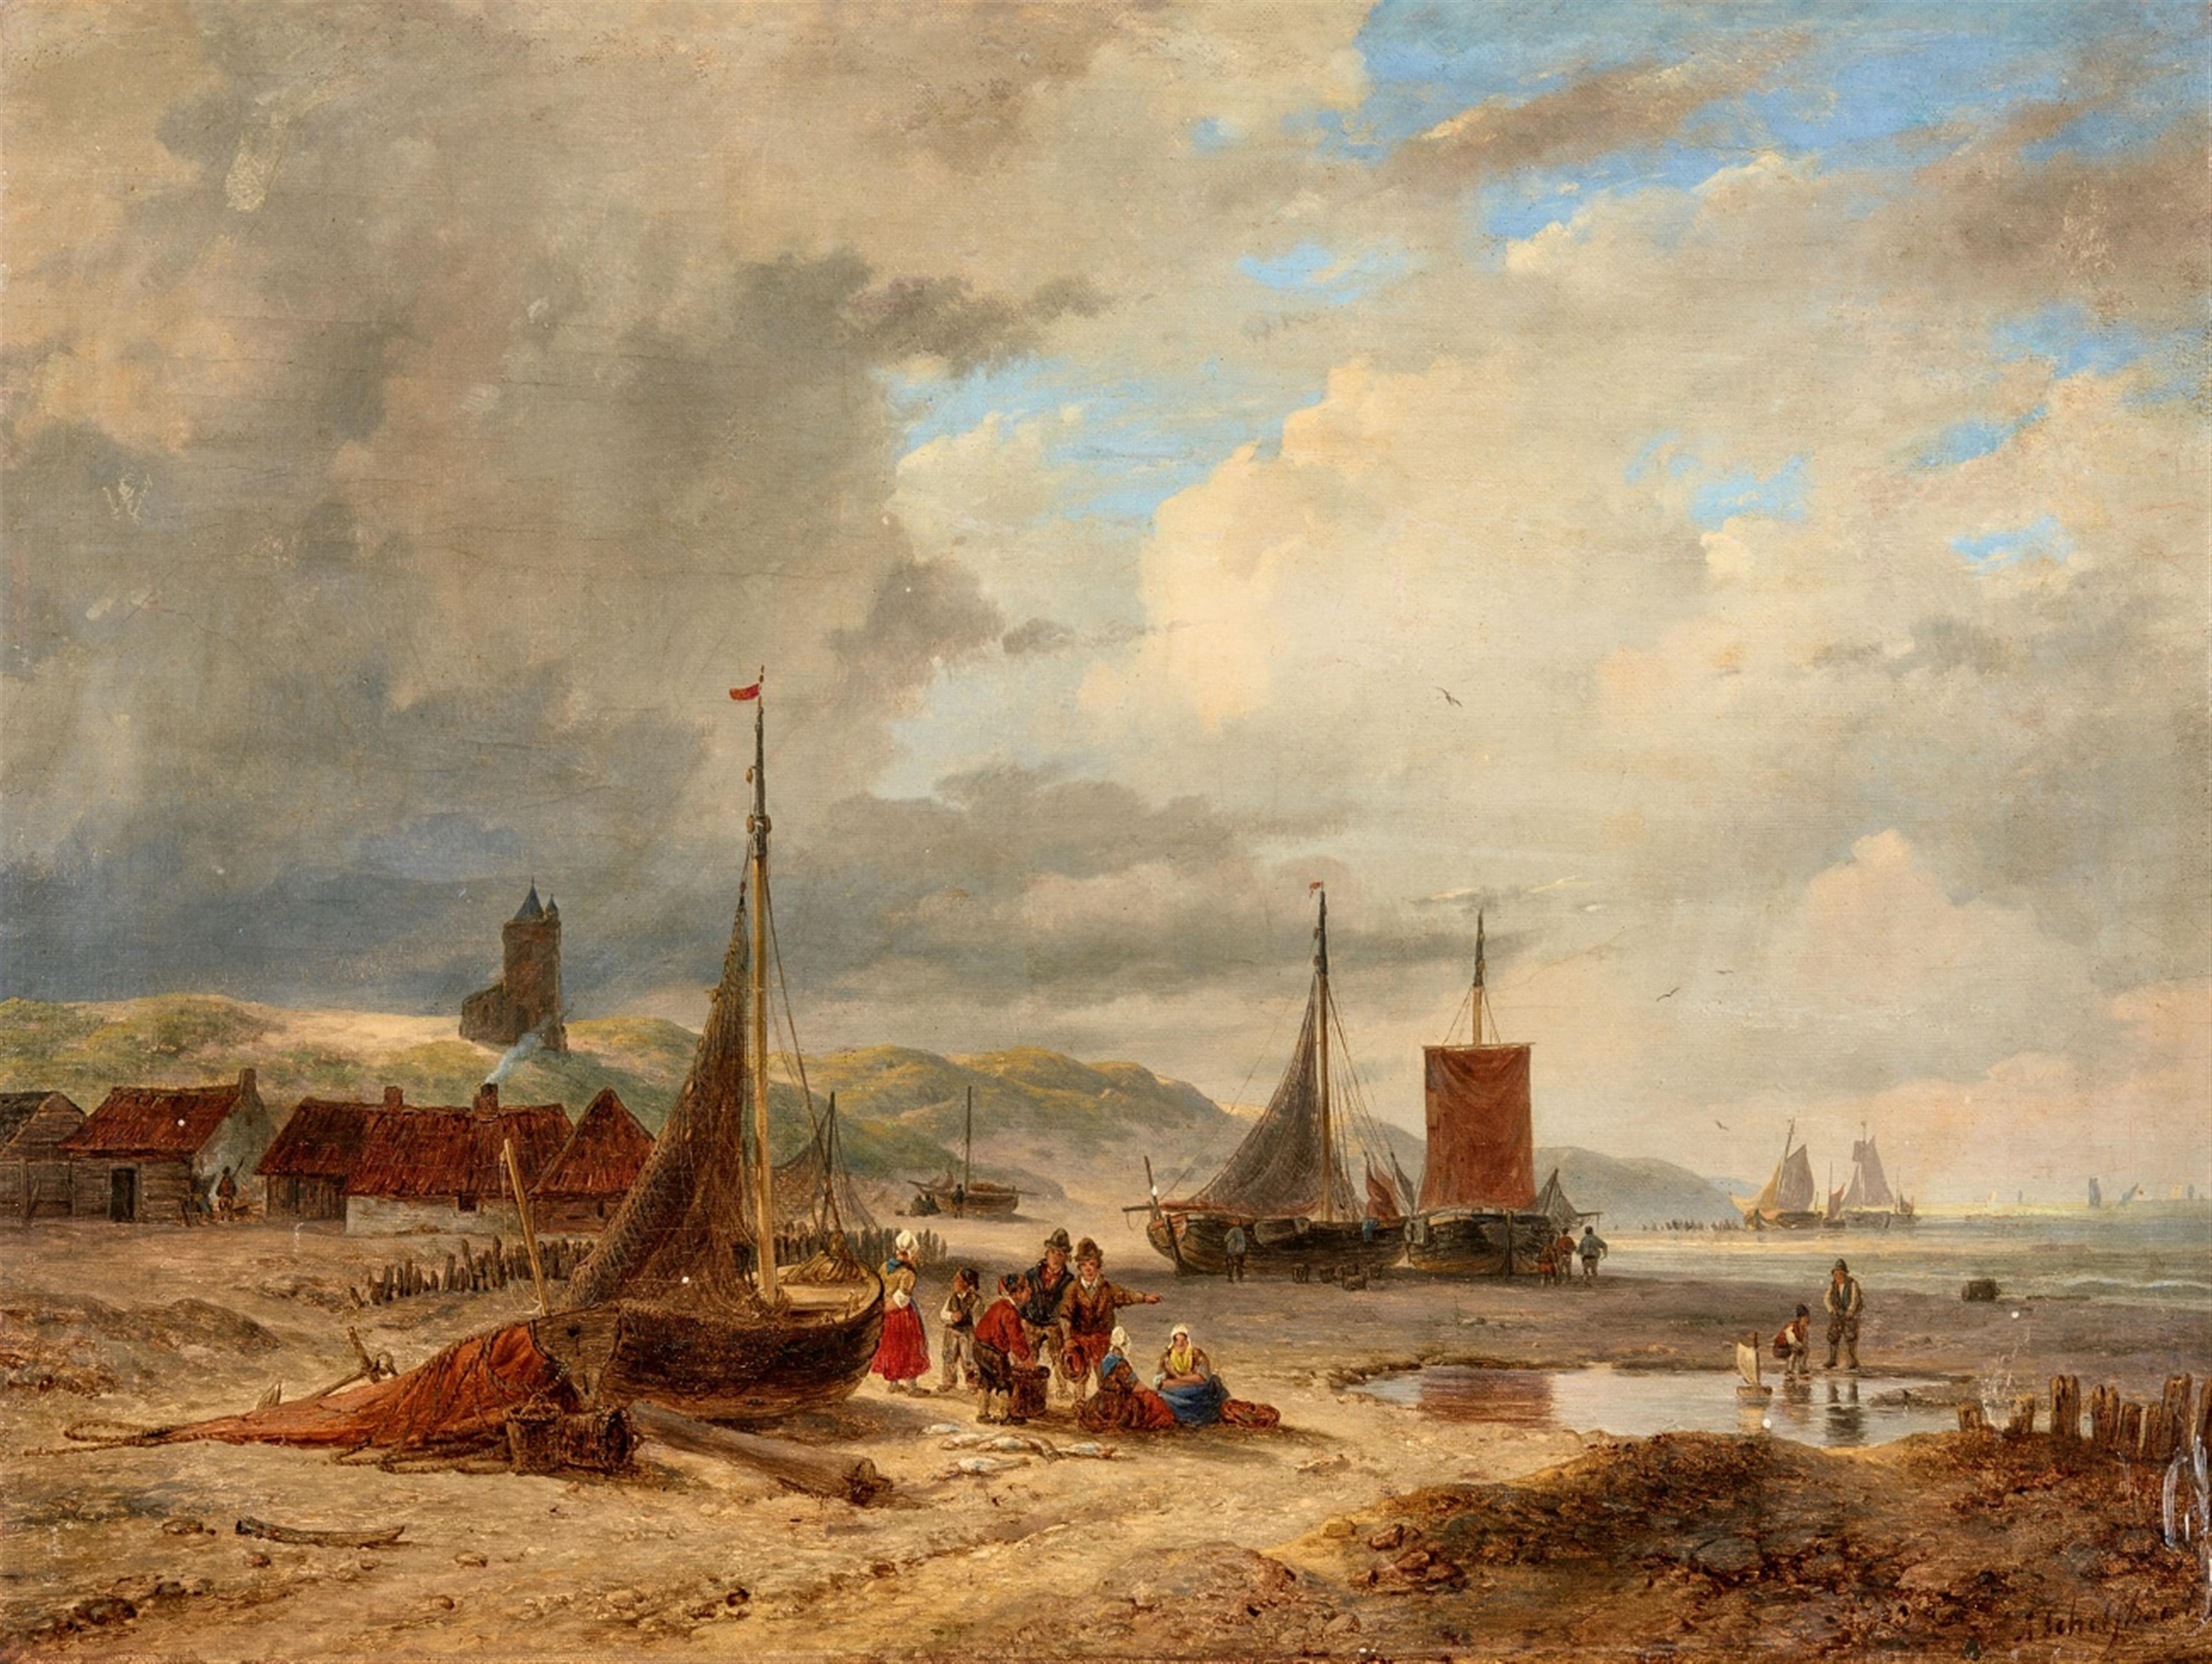 Andreas Schelfhout - Coastal Scene with Boats and Fishermen's Huts - image-1